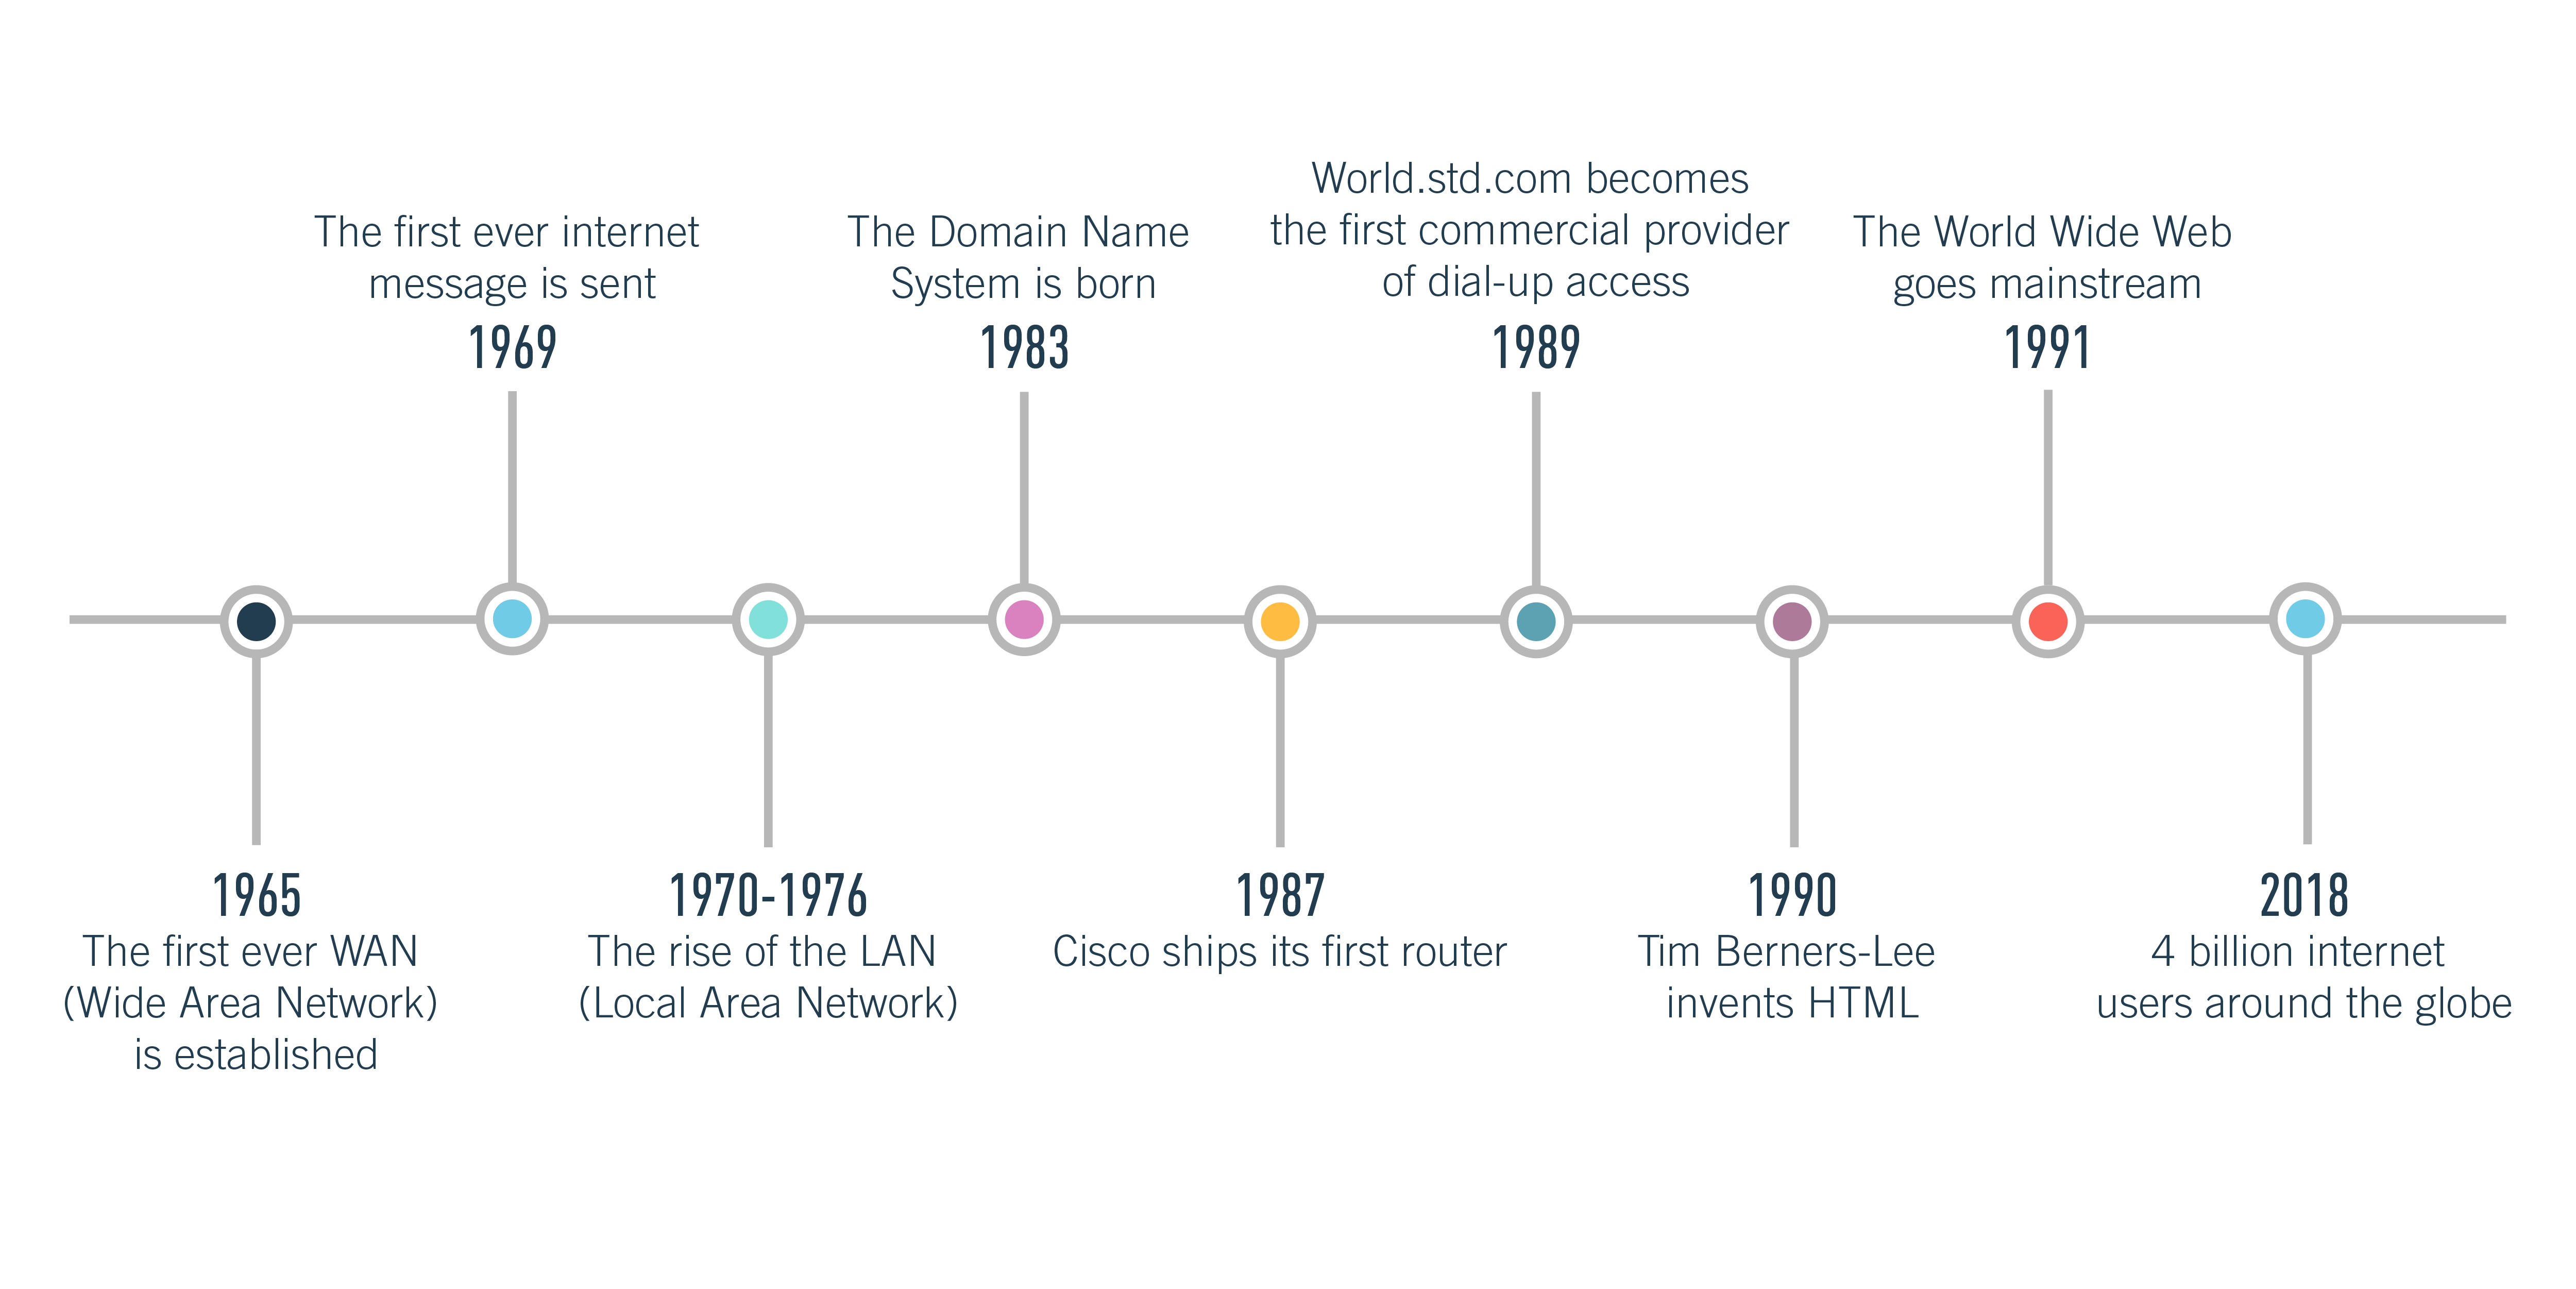 A timeline showing the history of the World Wide Web